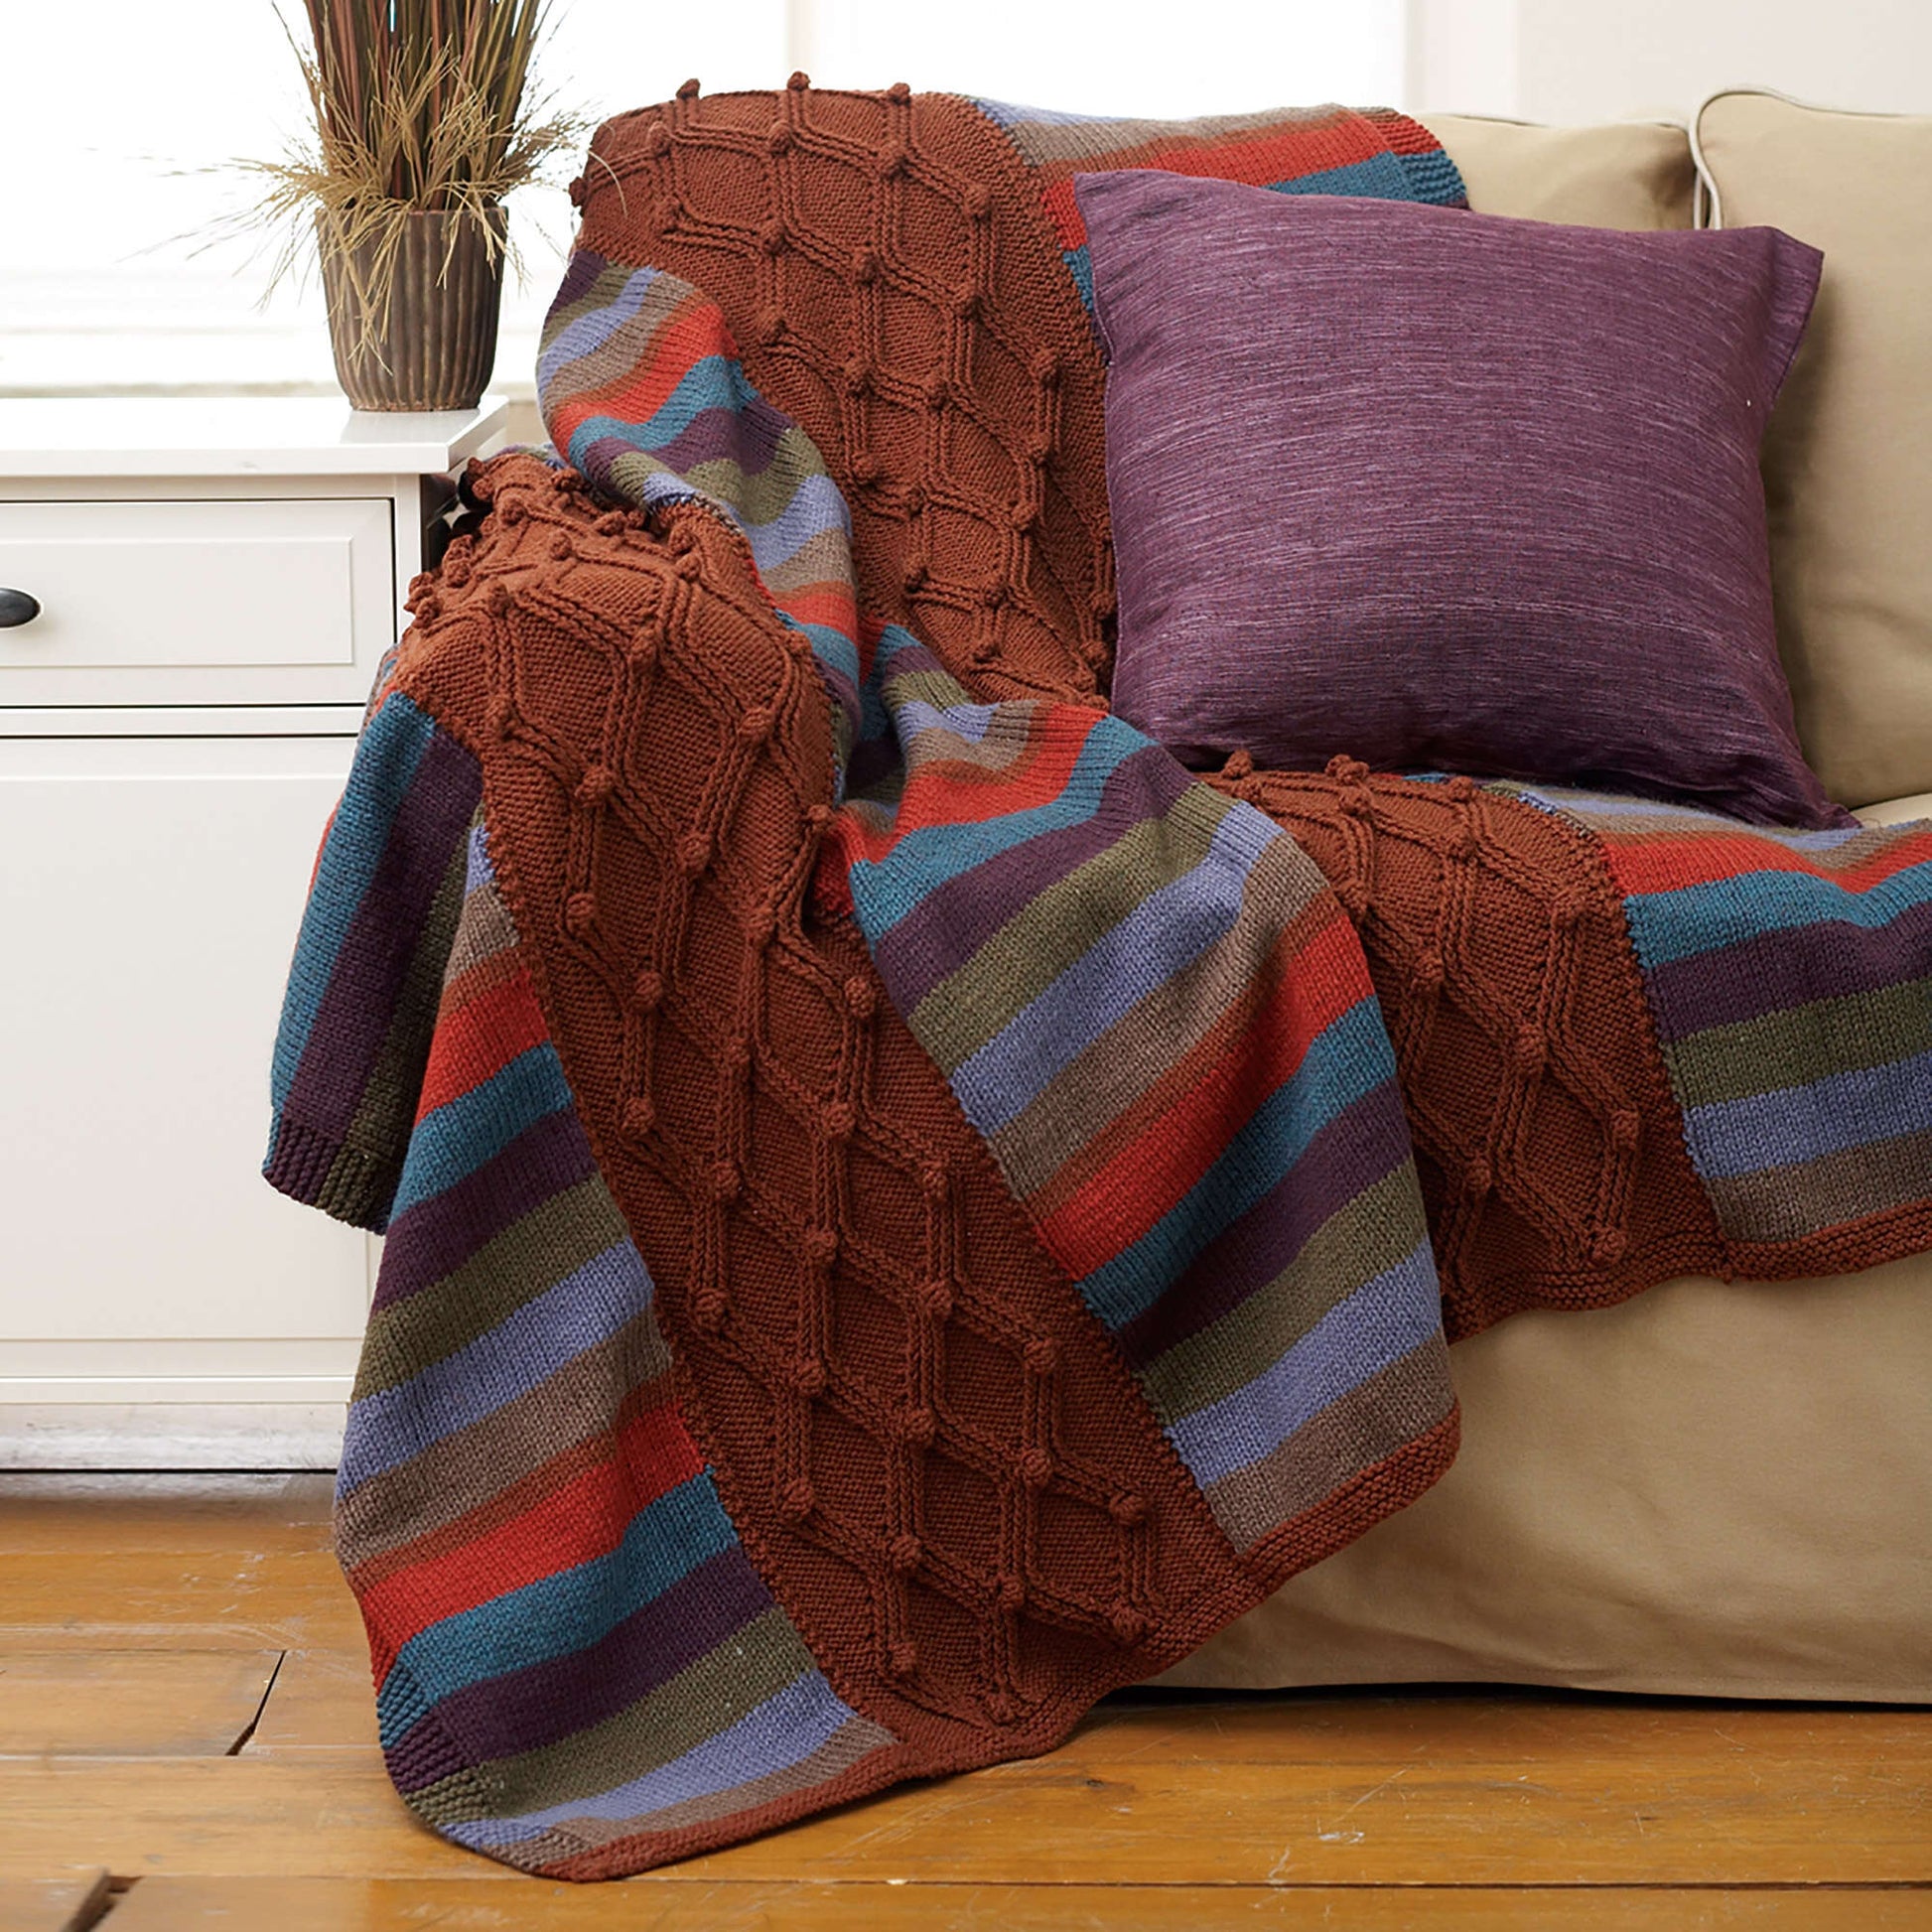 Free Bernat Knit Stripes And Cables Afghan Pattern